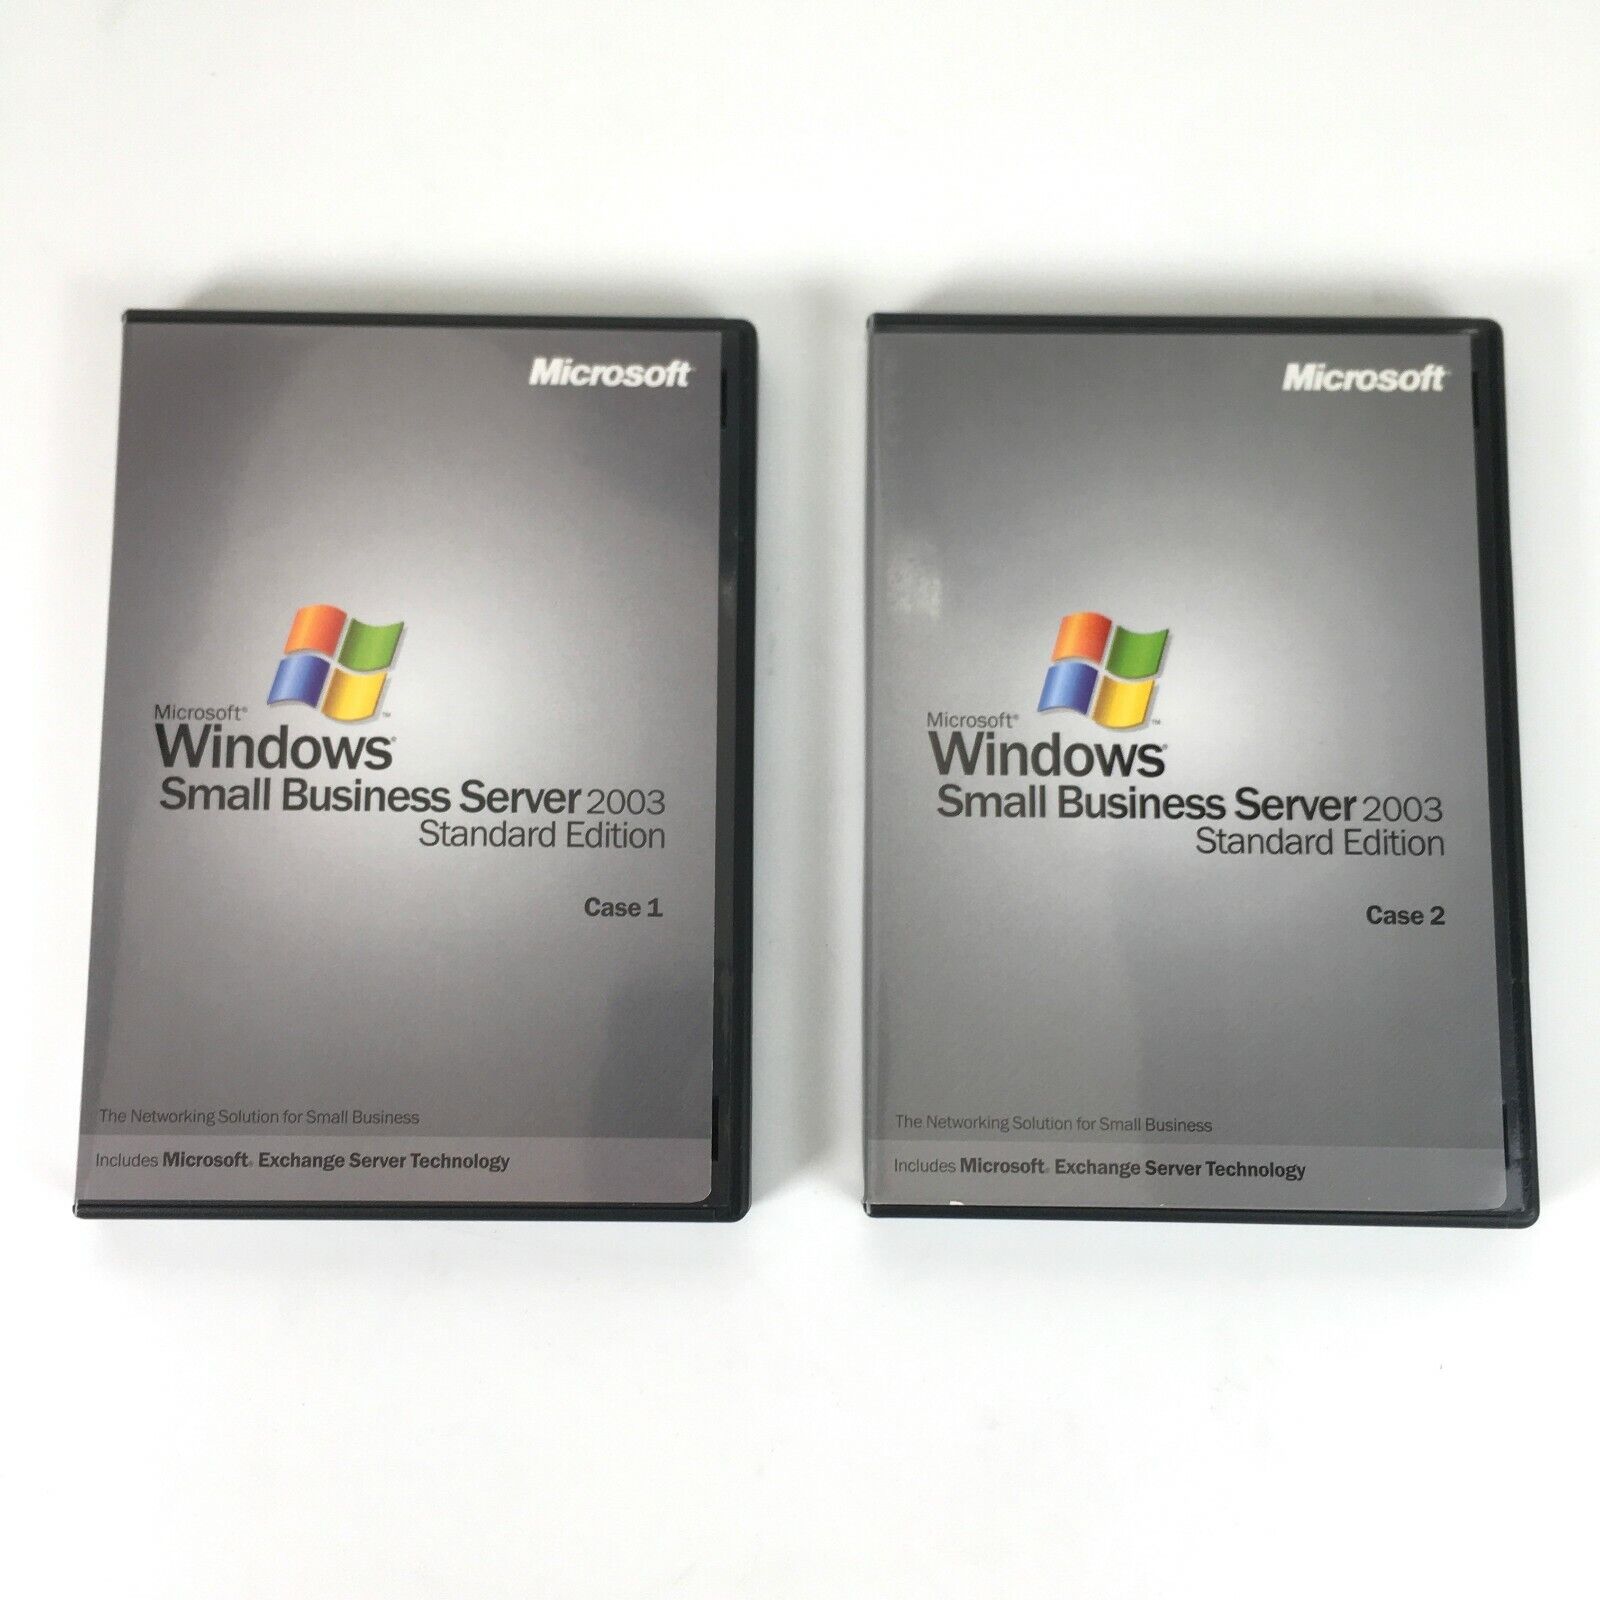 Microsoft Windows Small Business Server 2003 Standard Edition CD Case 1 And 2